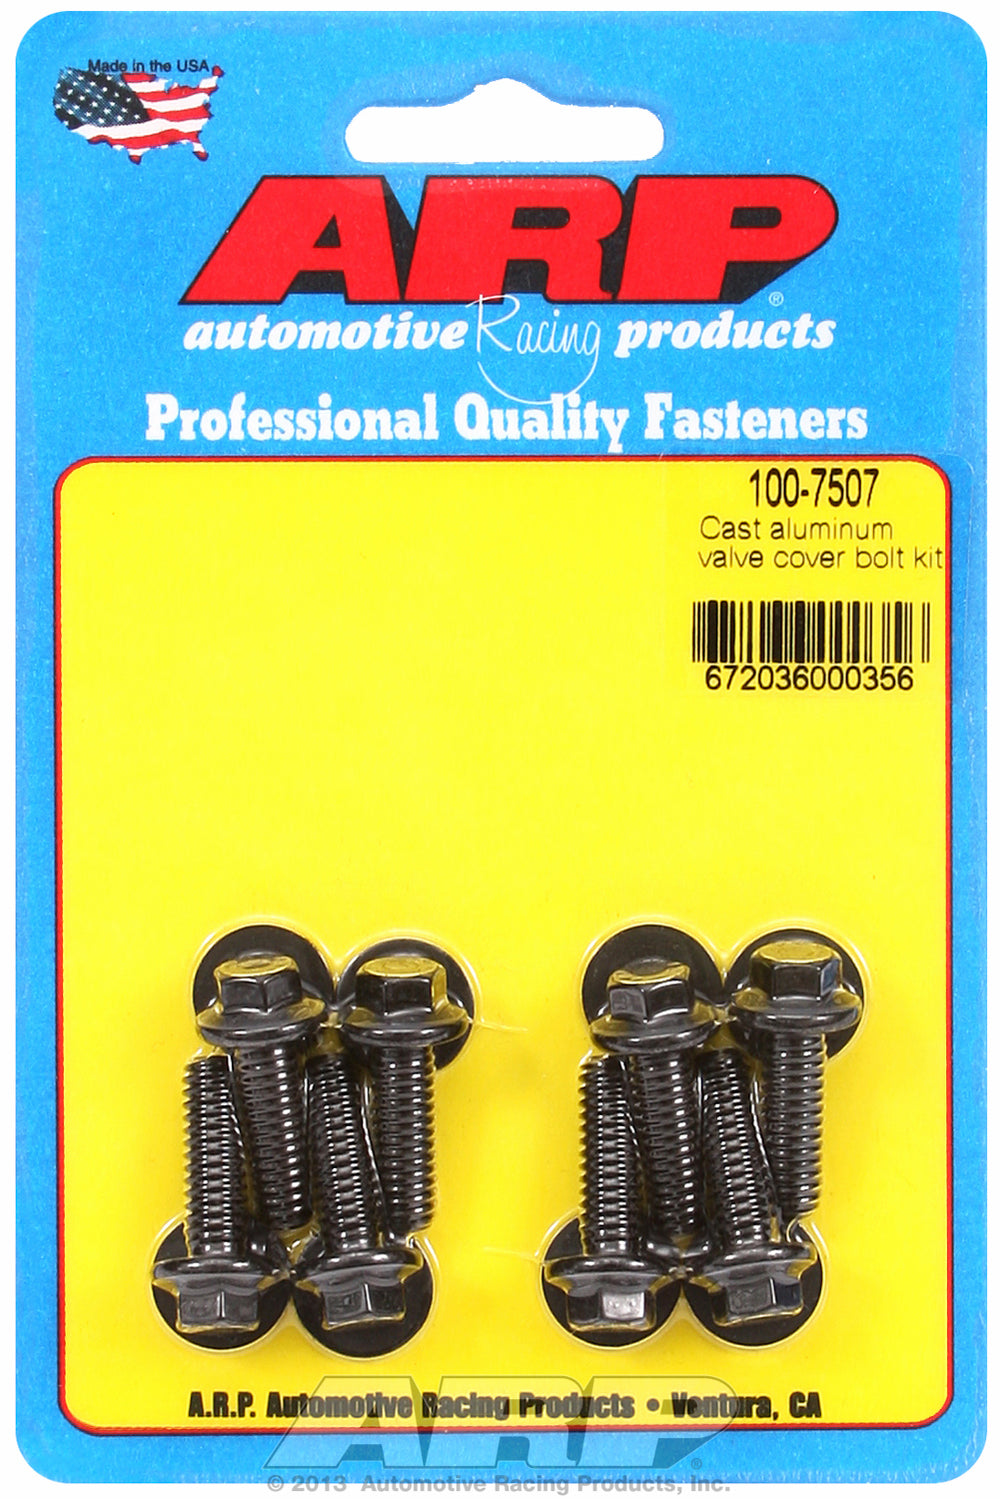 Valve Cover Bolt Kit for Cast Aluminum Covers 1/4-20 Thread, 0.812in UHL, Hex Head QTY: 8